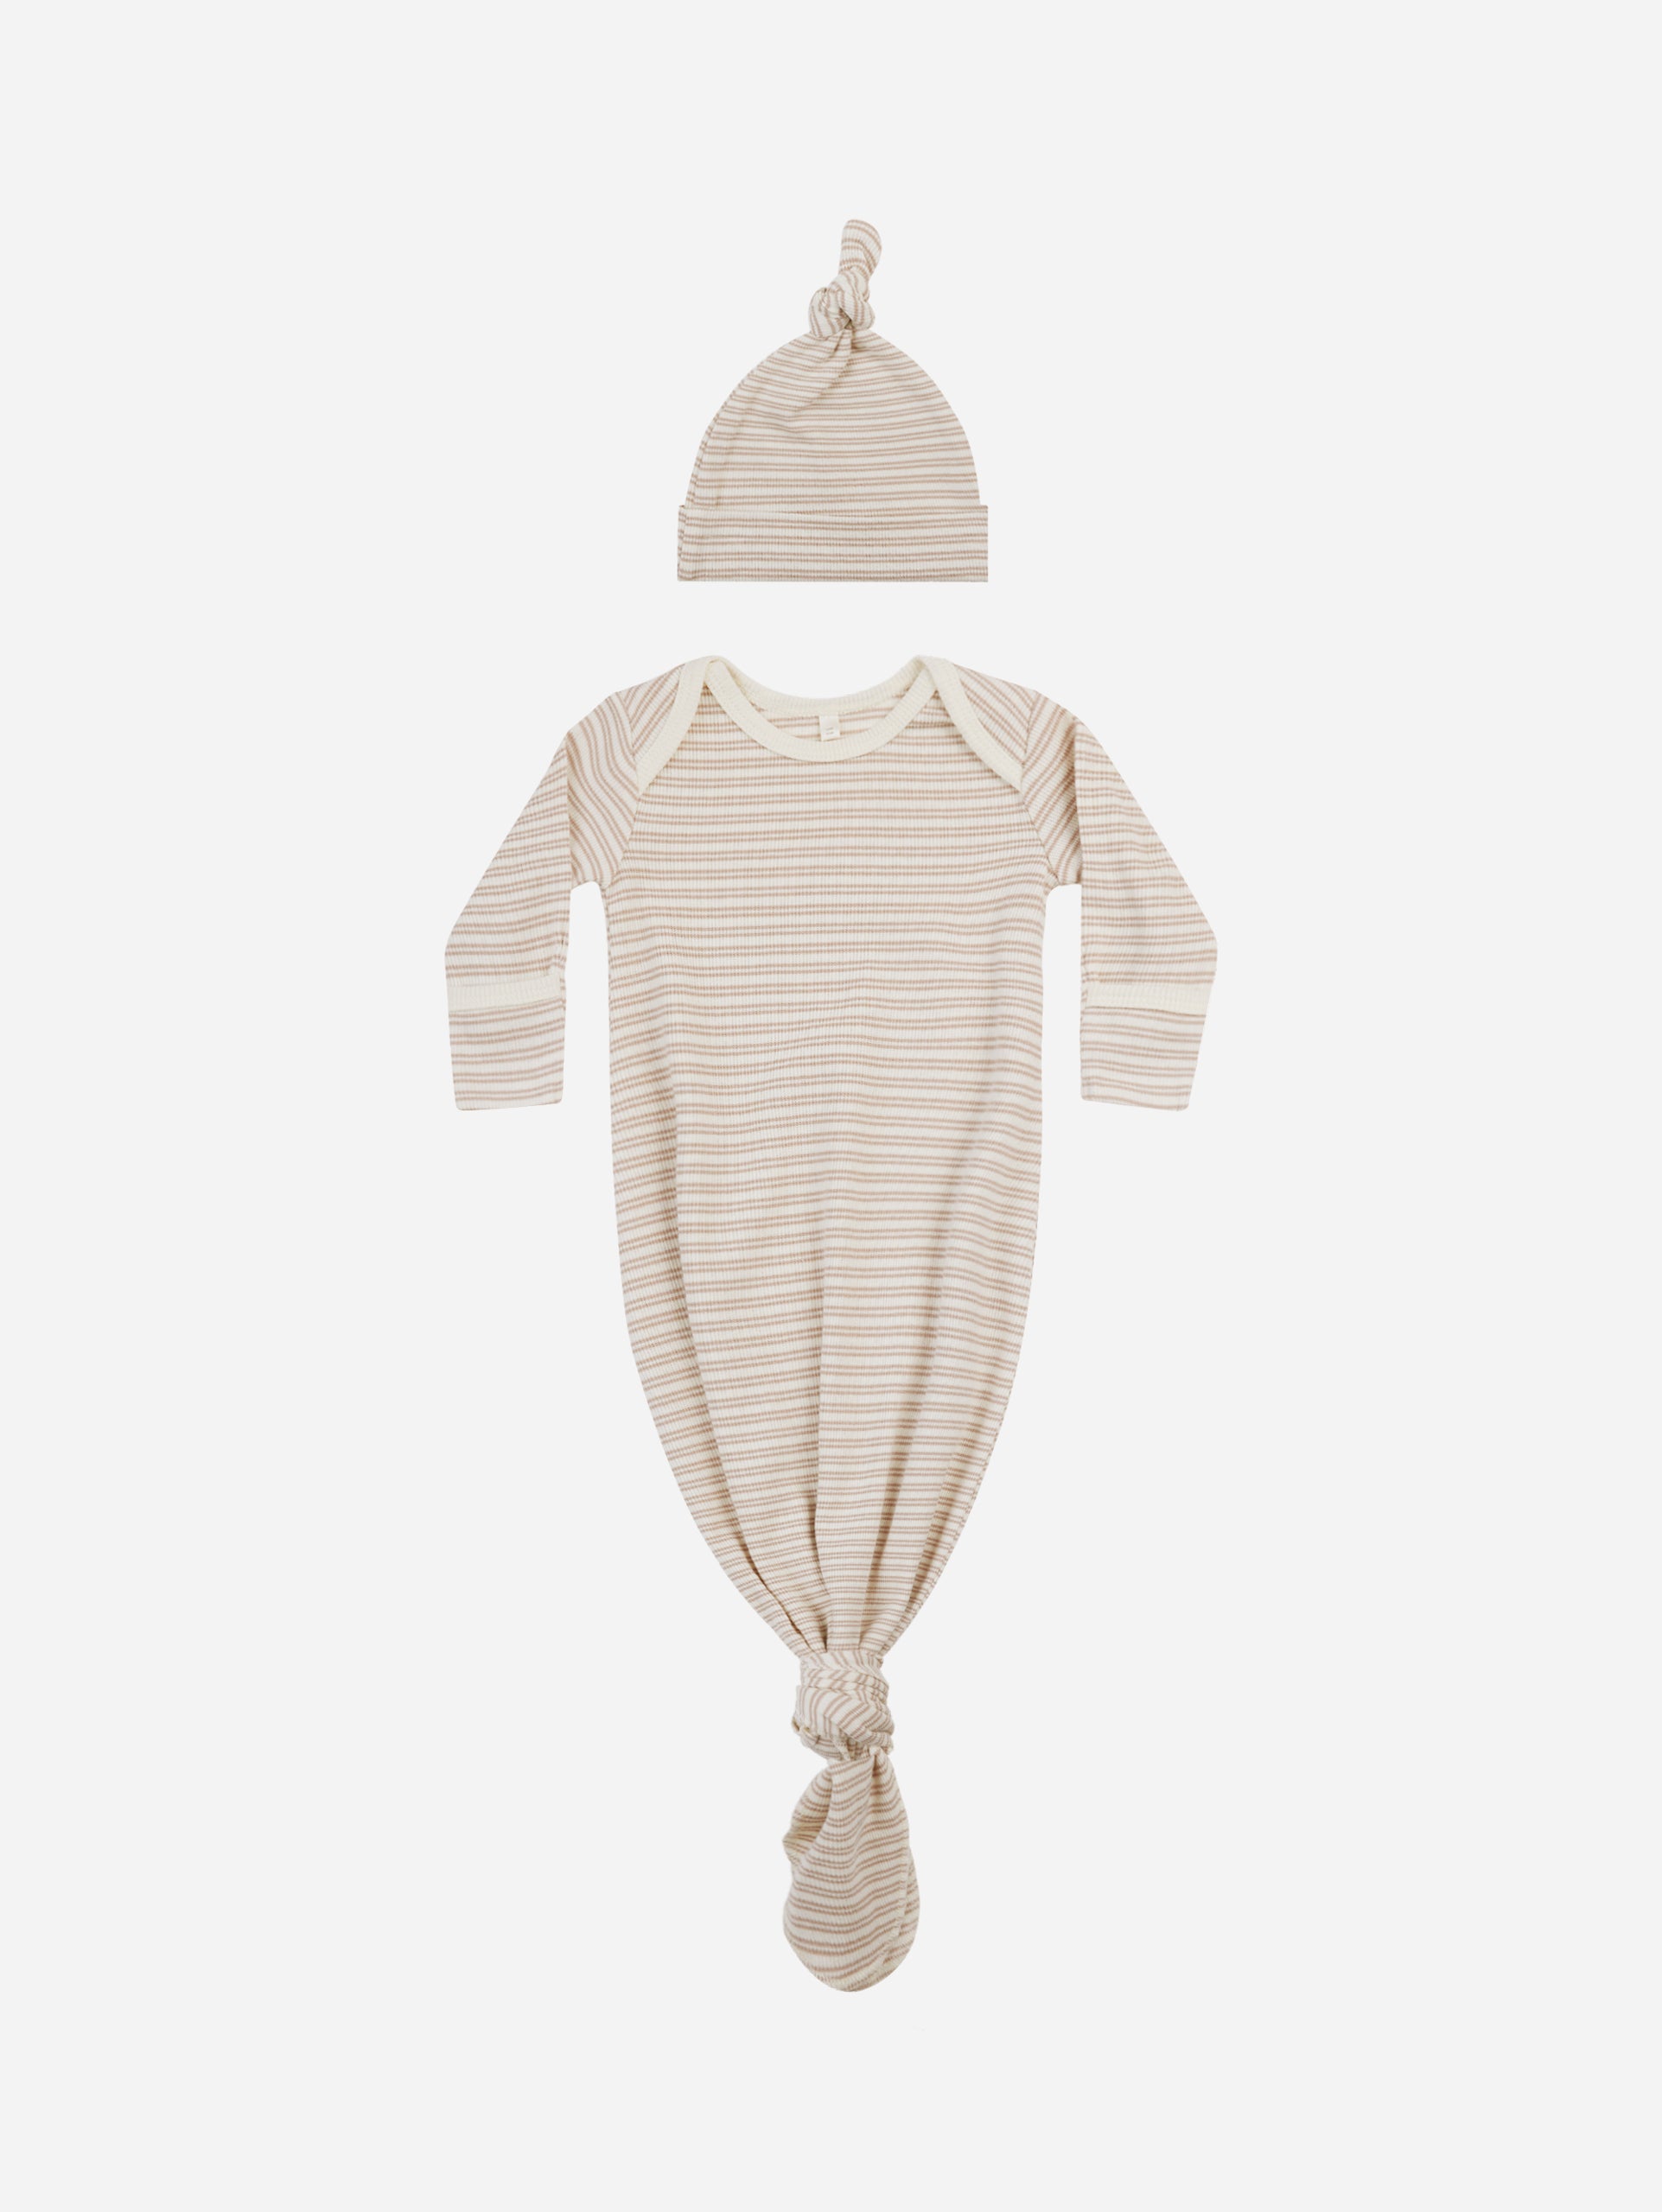 Knotted Baby Gown + Hat Set || Oat Stripe - Rylee + Cru | Kids Clothes | Trendy Baby Clothes | Modern Infant Outfits |